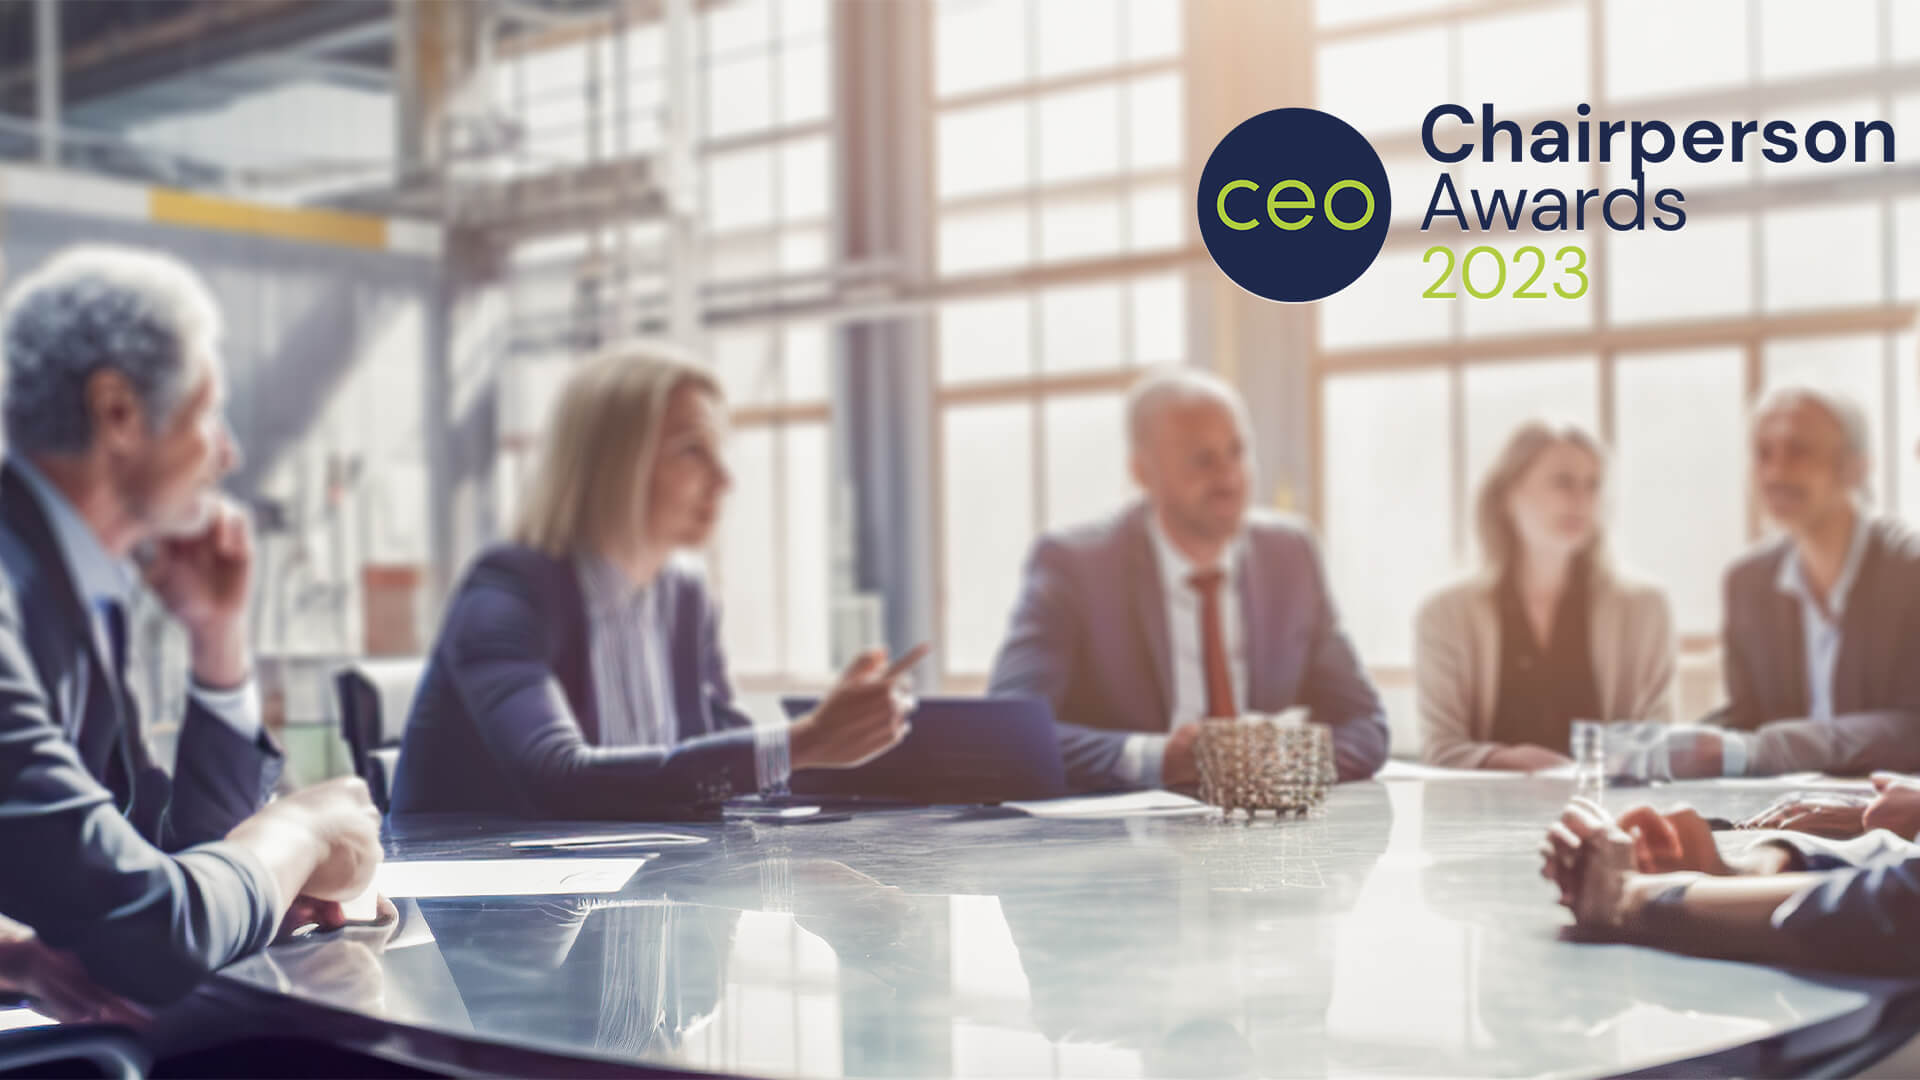 CEO Monthly Magazine Announces the Winners of the 2023 Chairperson Awards